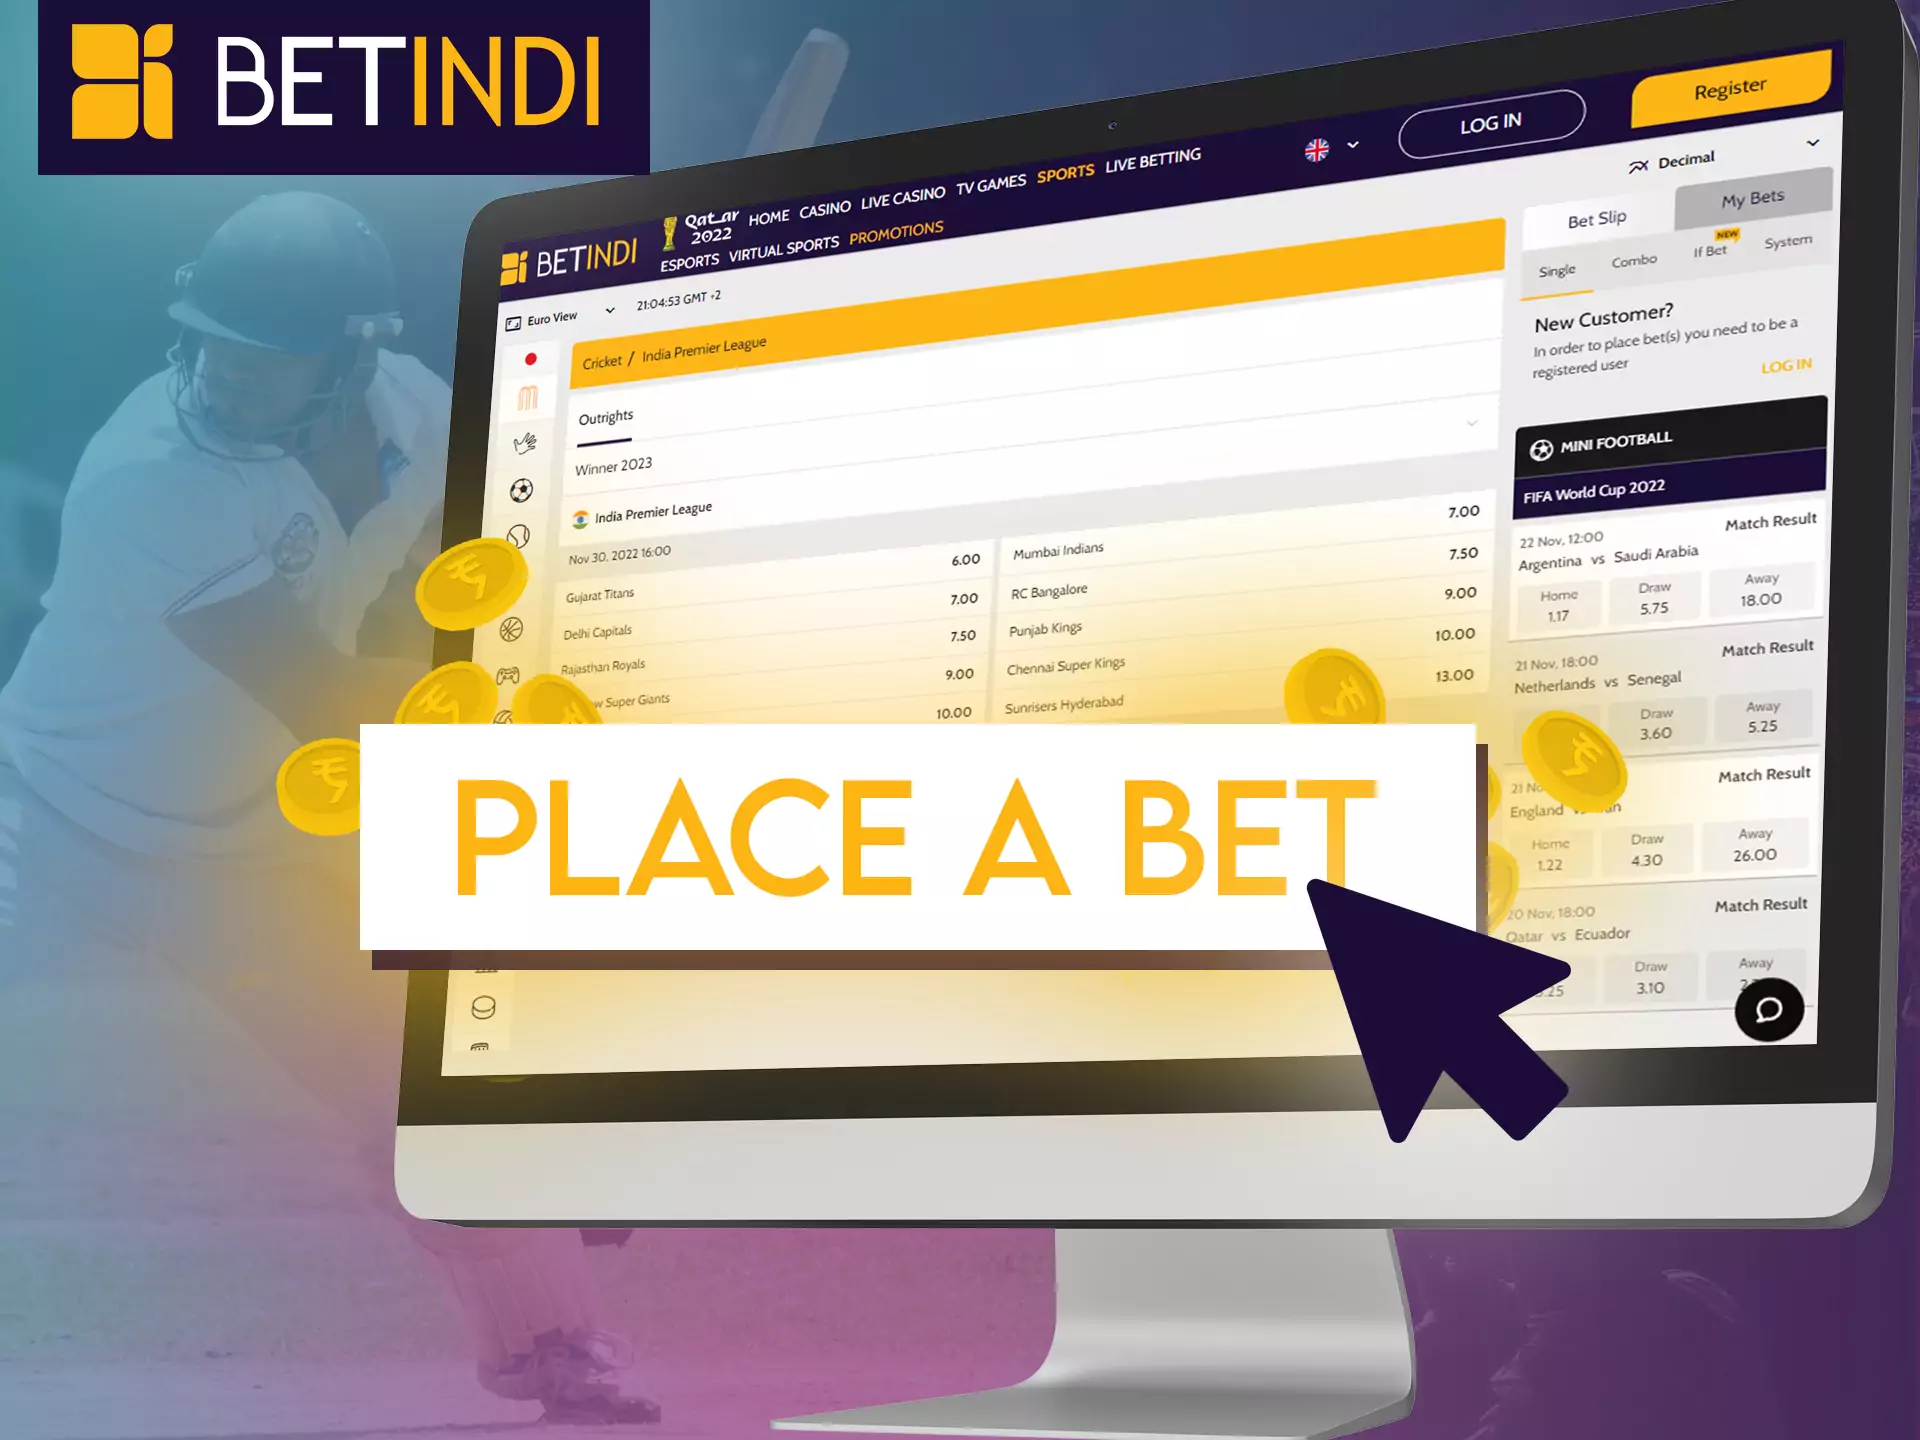 Use this instruction to place bets on Betindi.